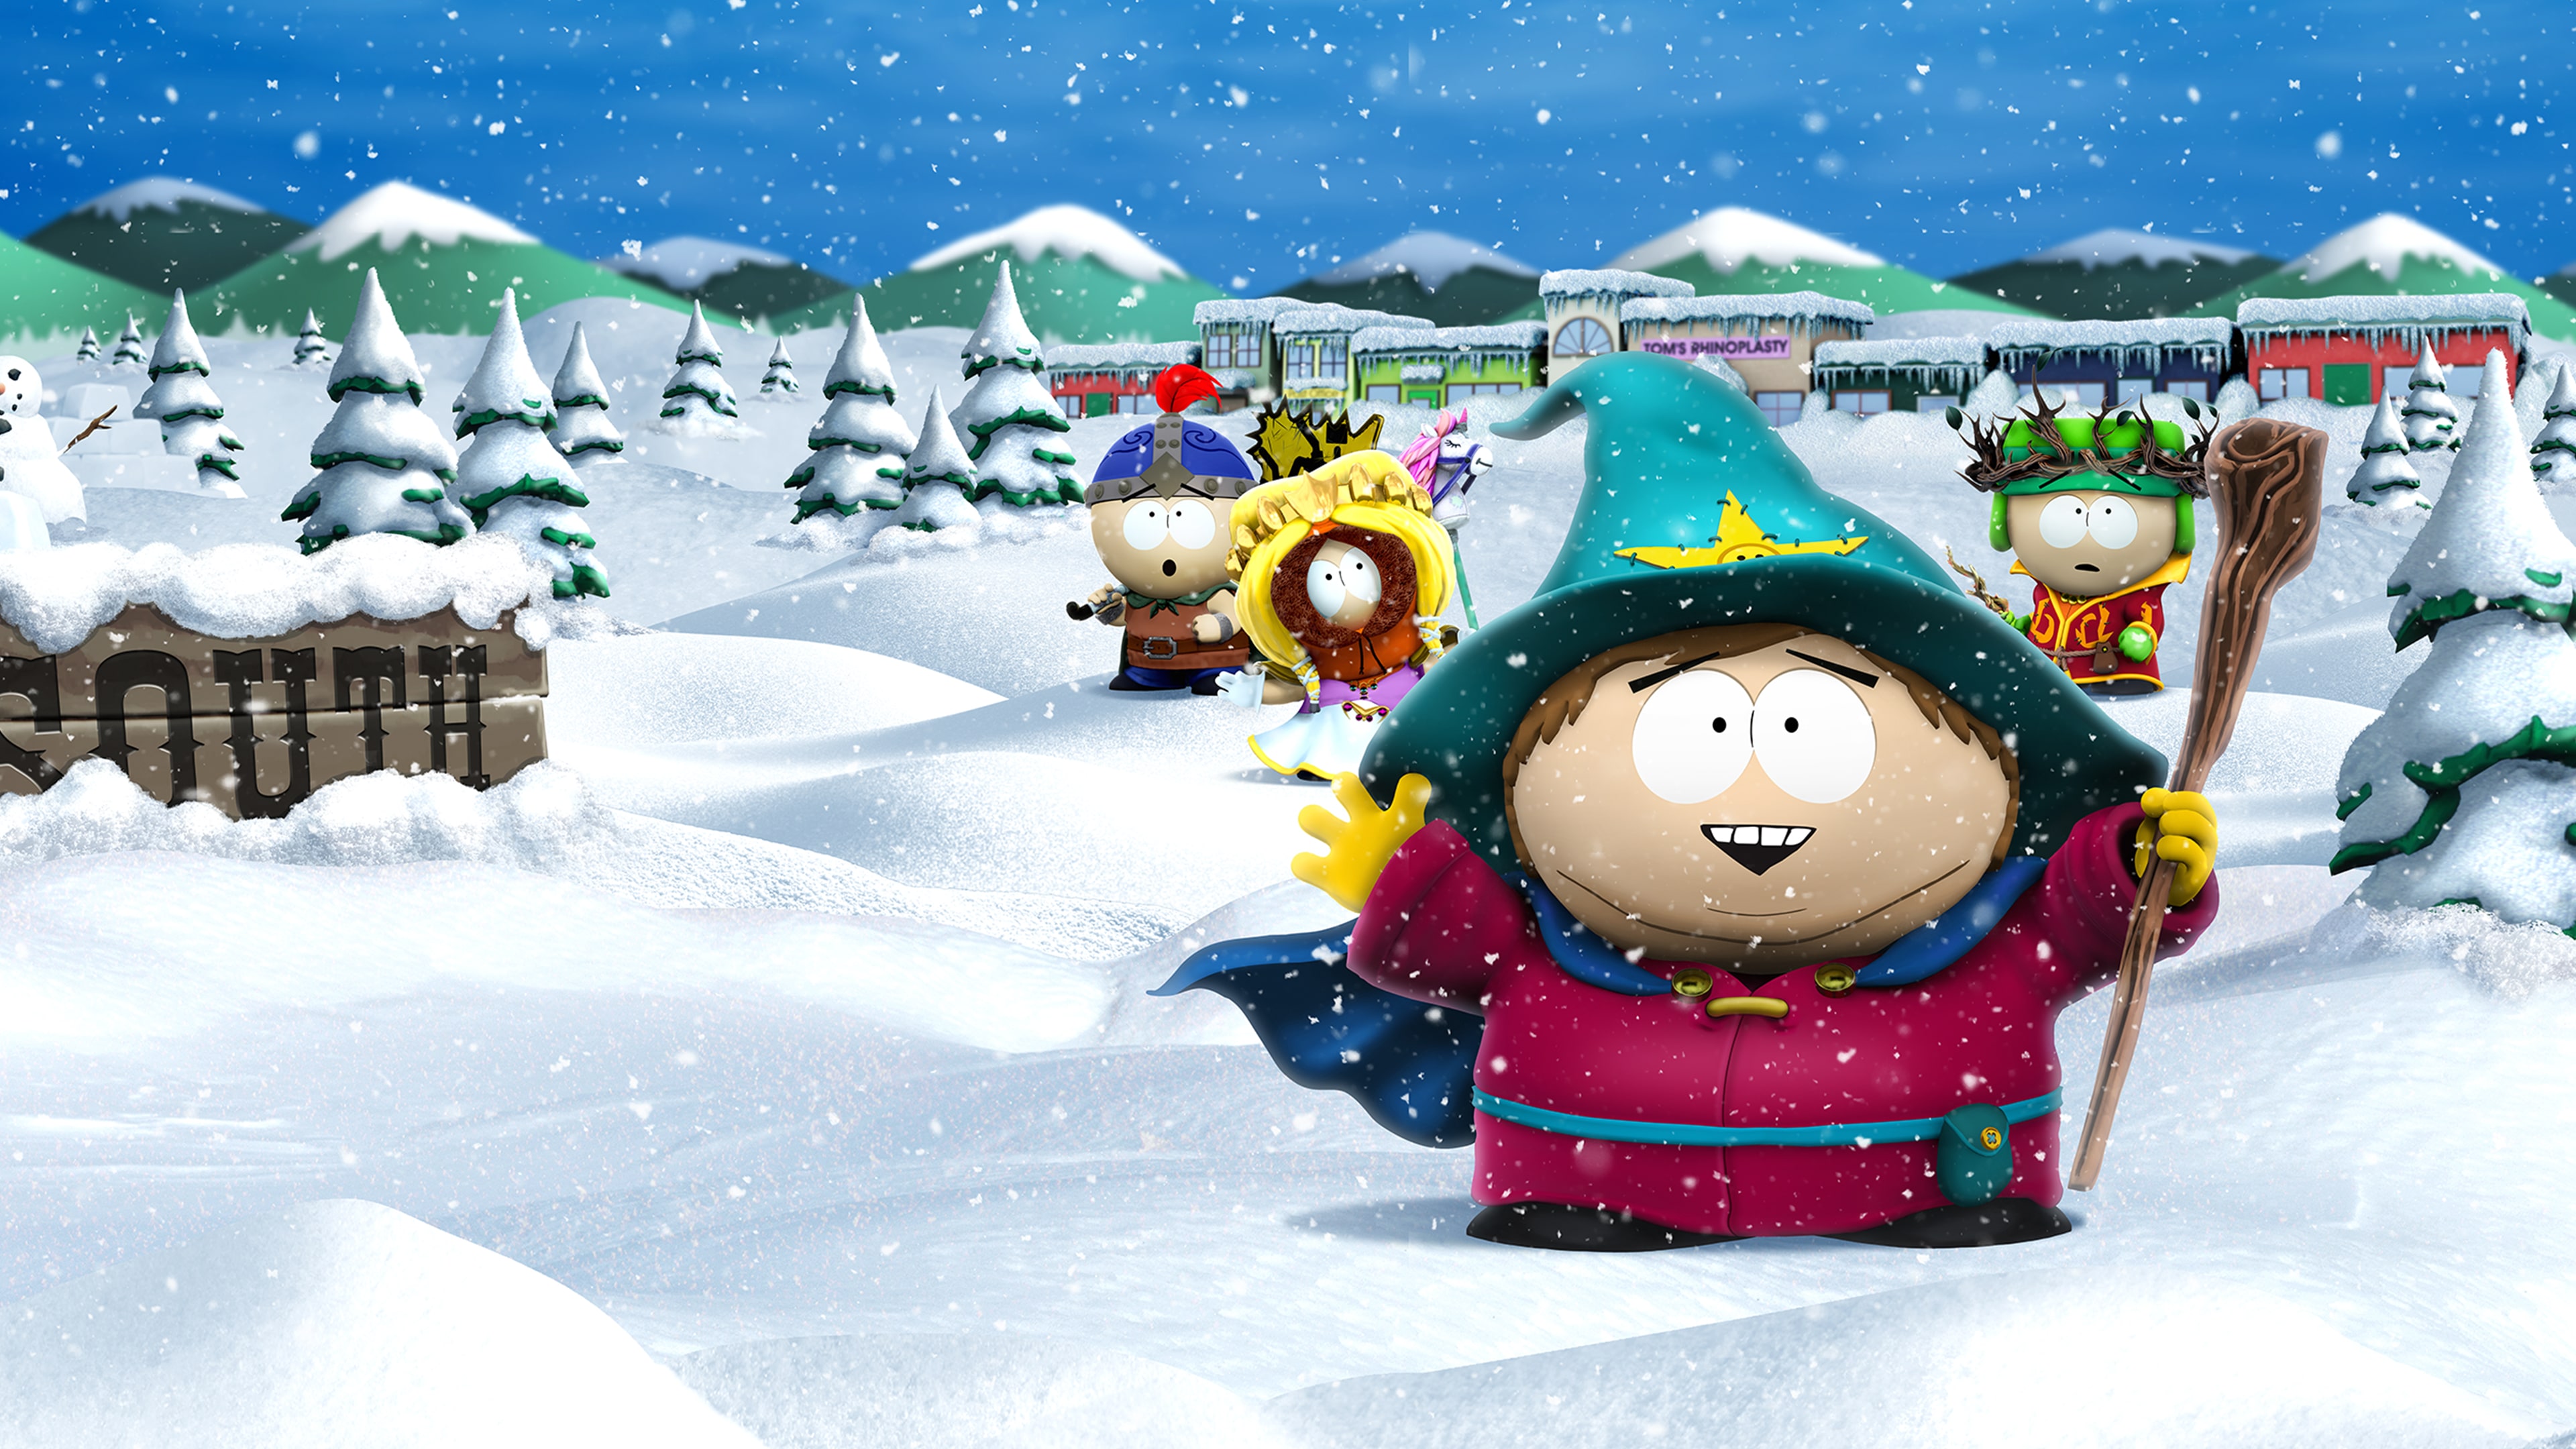 SOUTH PARK: SNOW DAY! Digital Deluxe (English, Korean, Japanese)